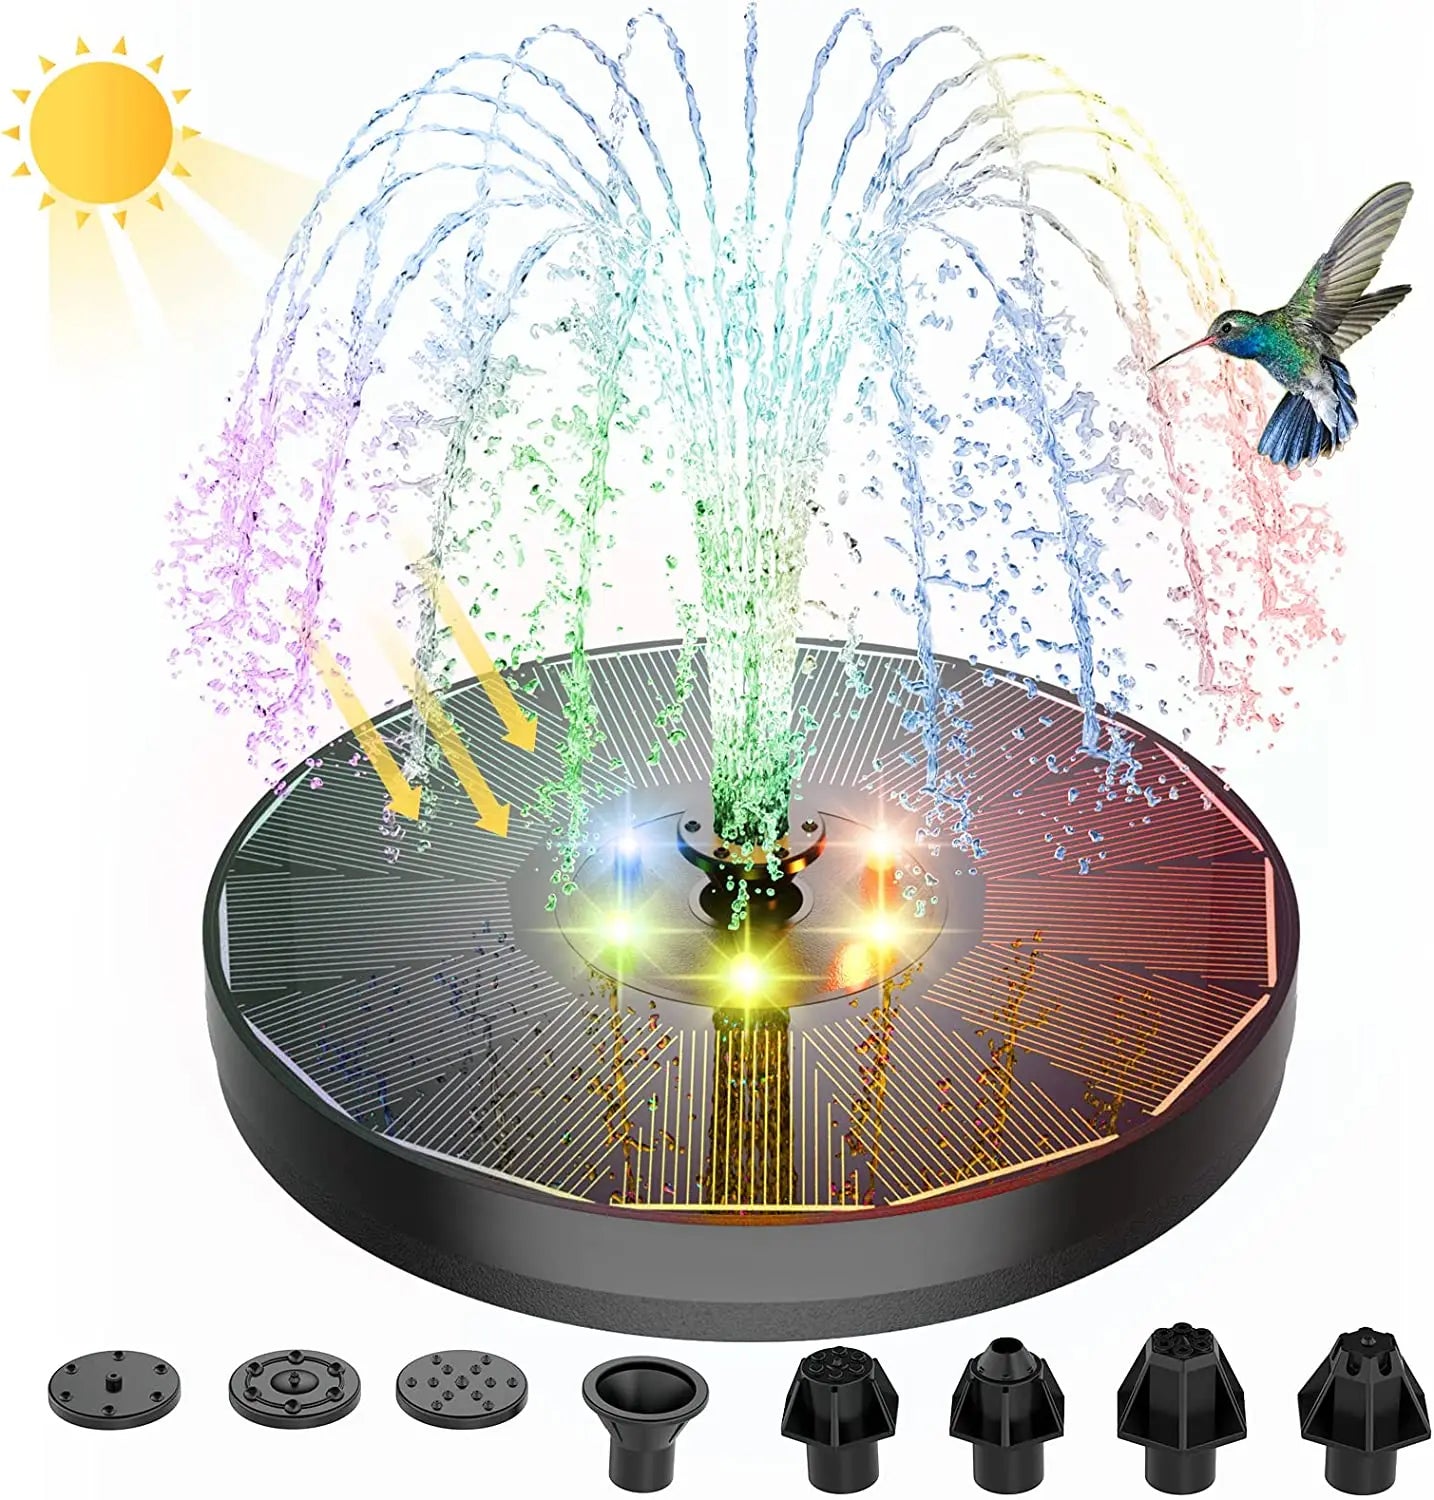 3W Solar Fountain, Solar-powered water fountain with color-changing LED lights stores daytime energy for nighttime display.